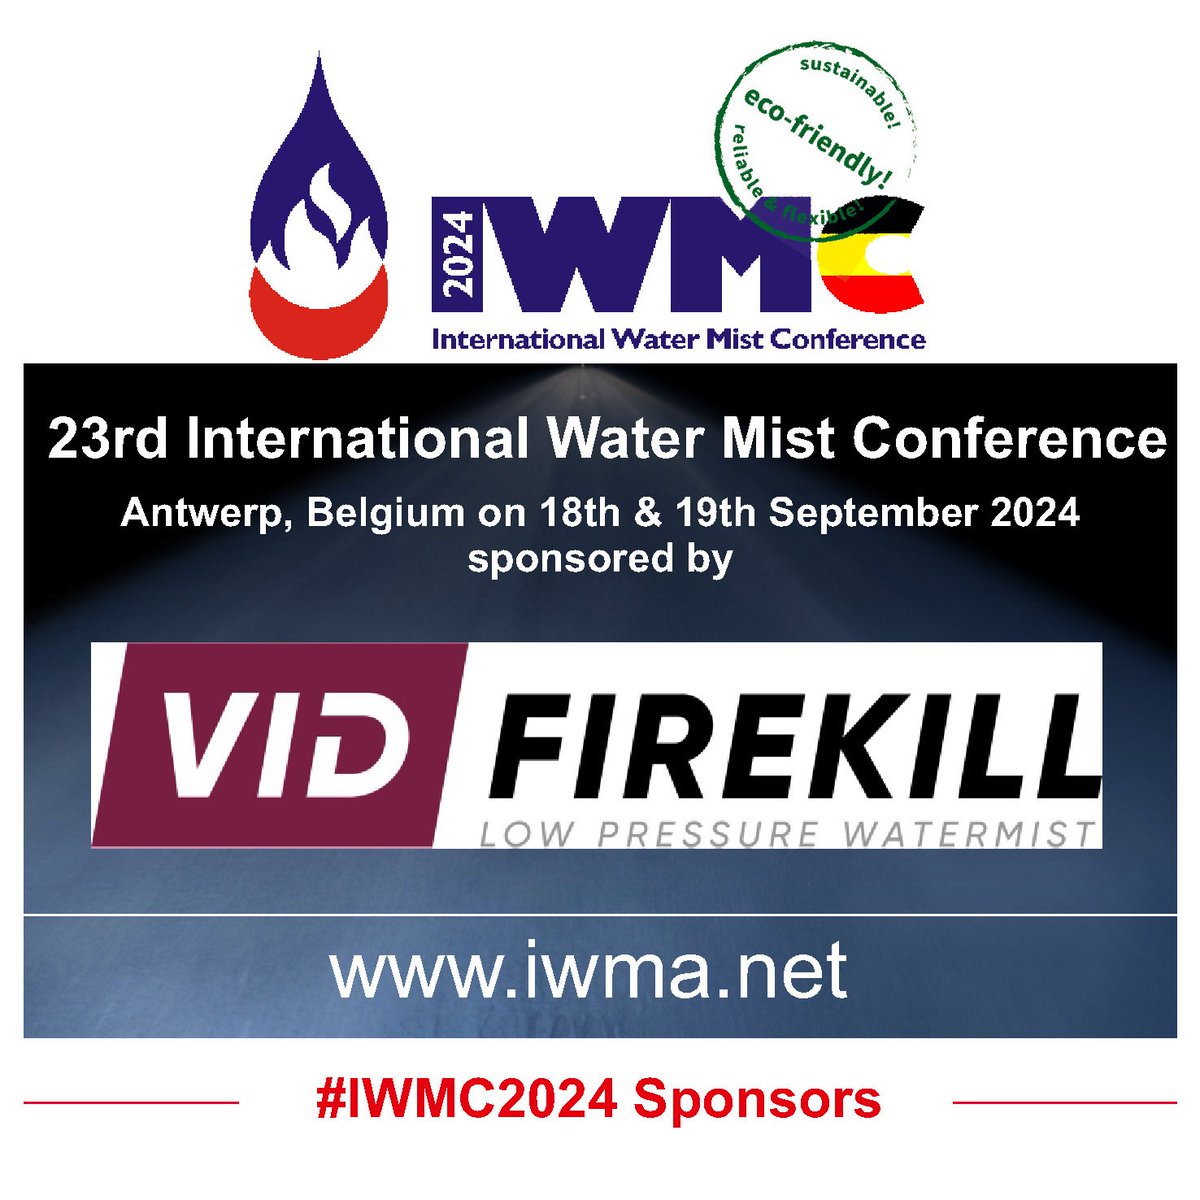 One of the sponsors of #IWMC2024 will be #VIDFIREKILL ... #IWMA would like to say thanks! #watermist #fireengineering #firesafety #fireprotection #greentechnology #savelives #sustainability #ecofriendliness